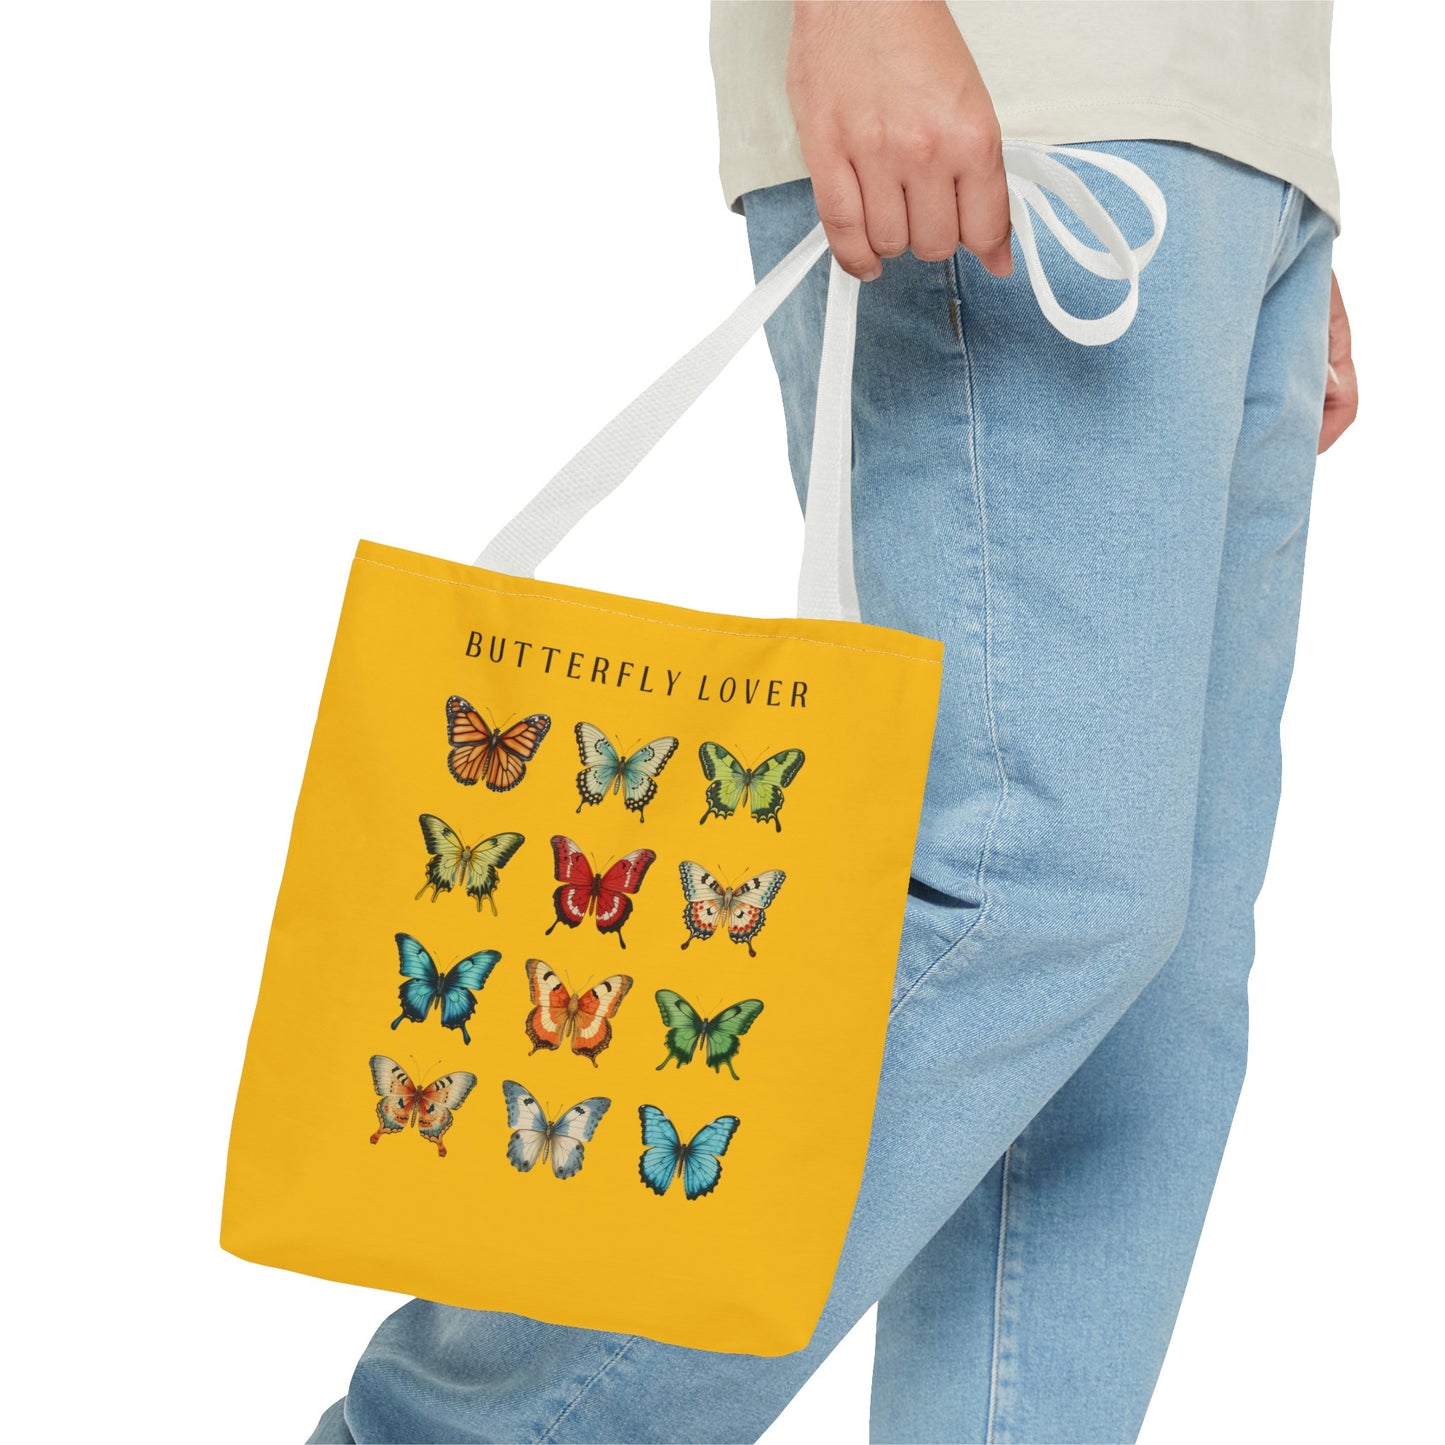 Graphic design (Butterfly Lover)Tote Bag